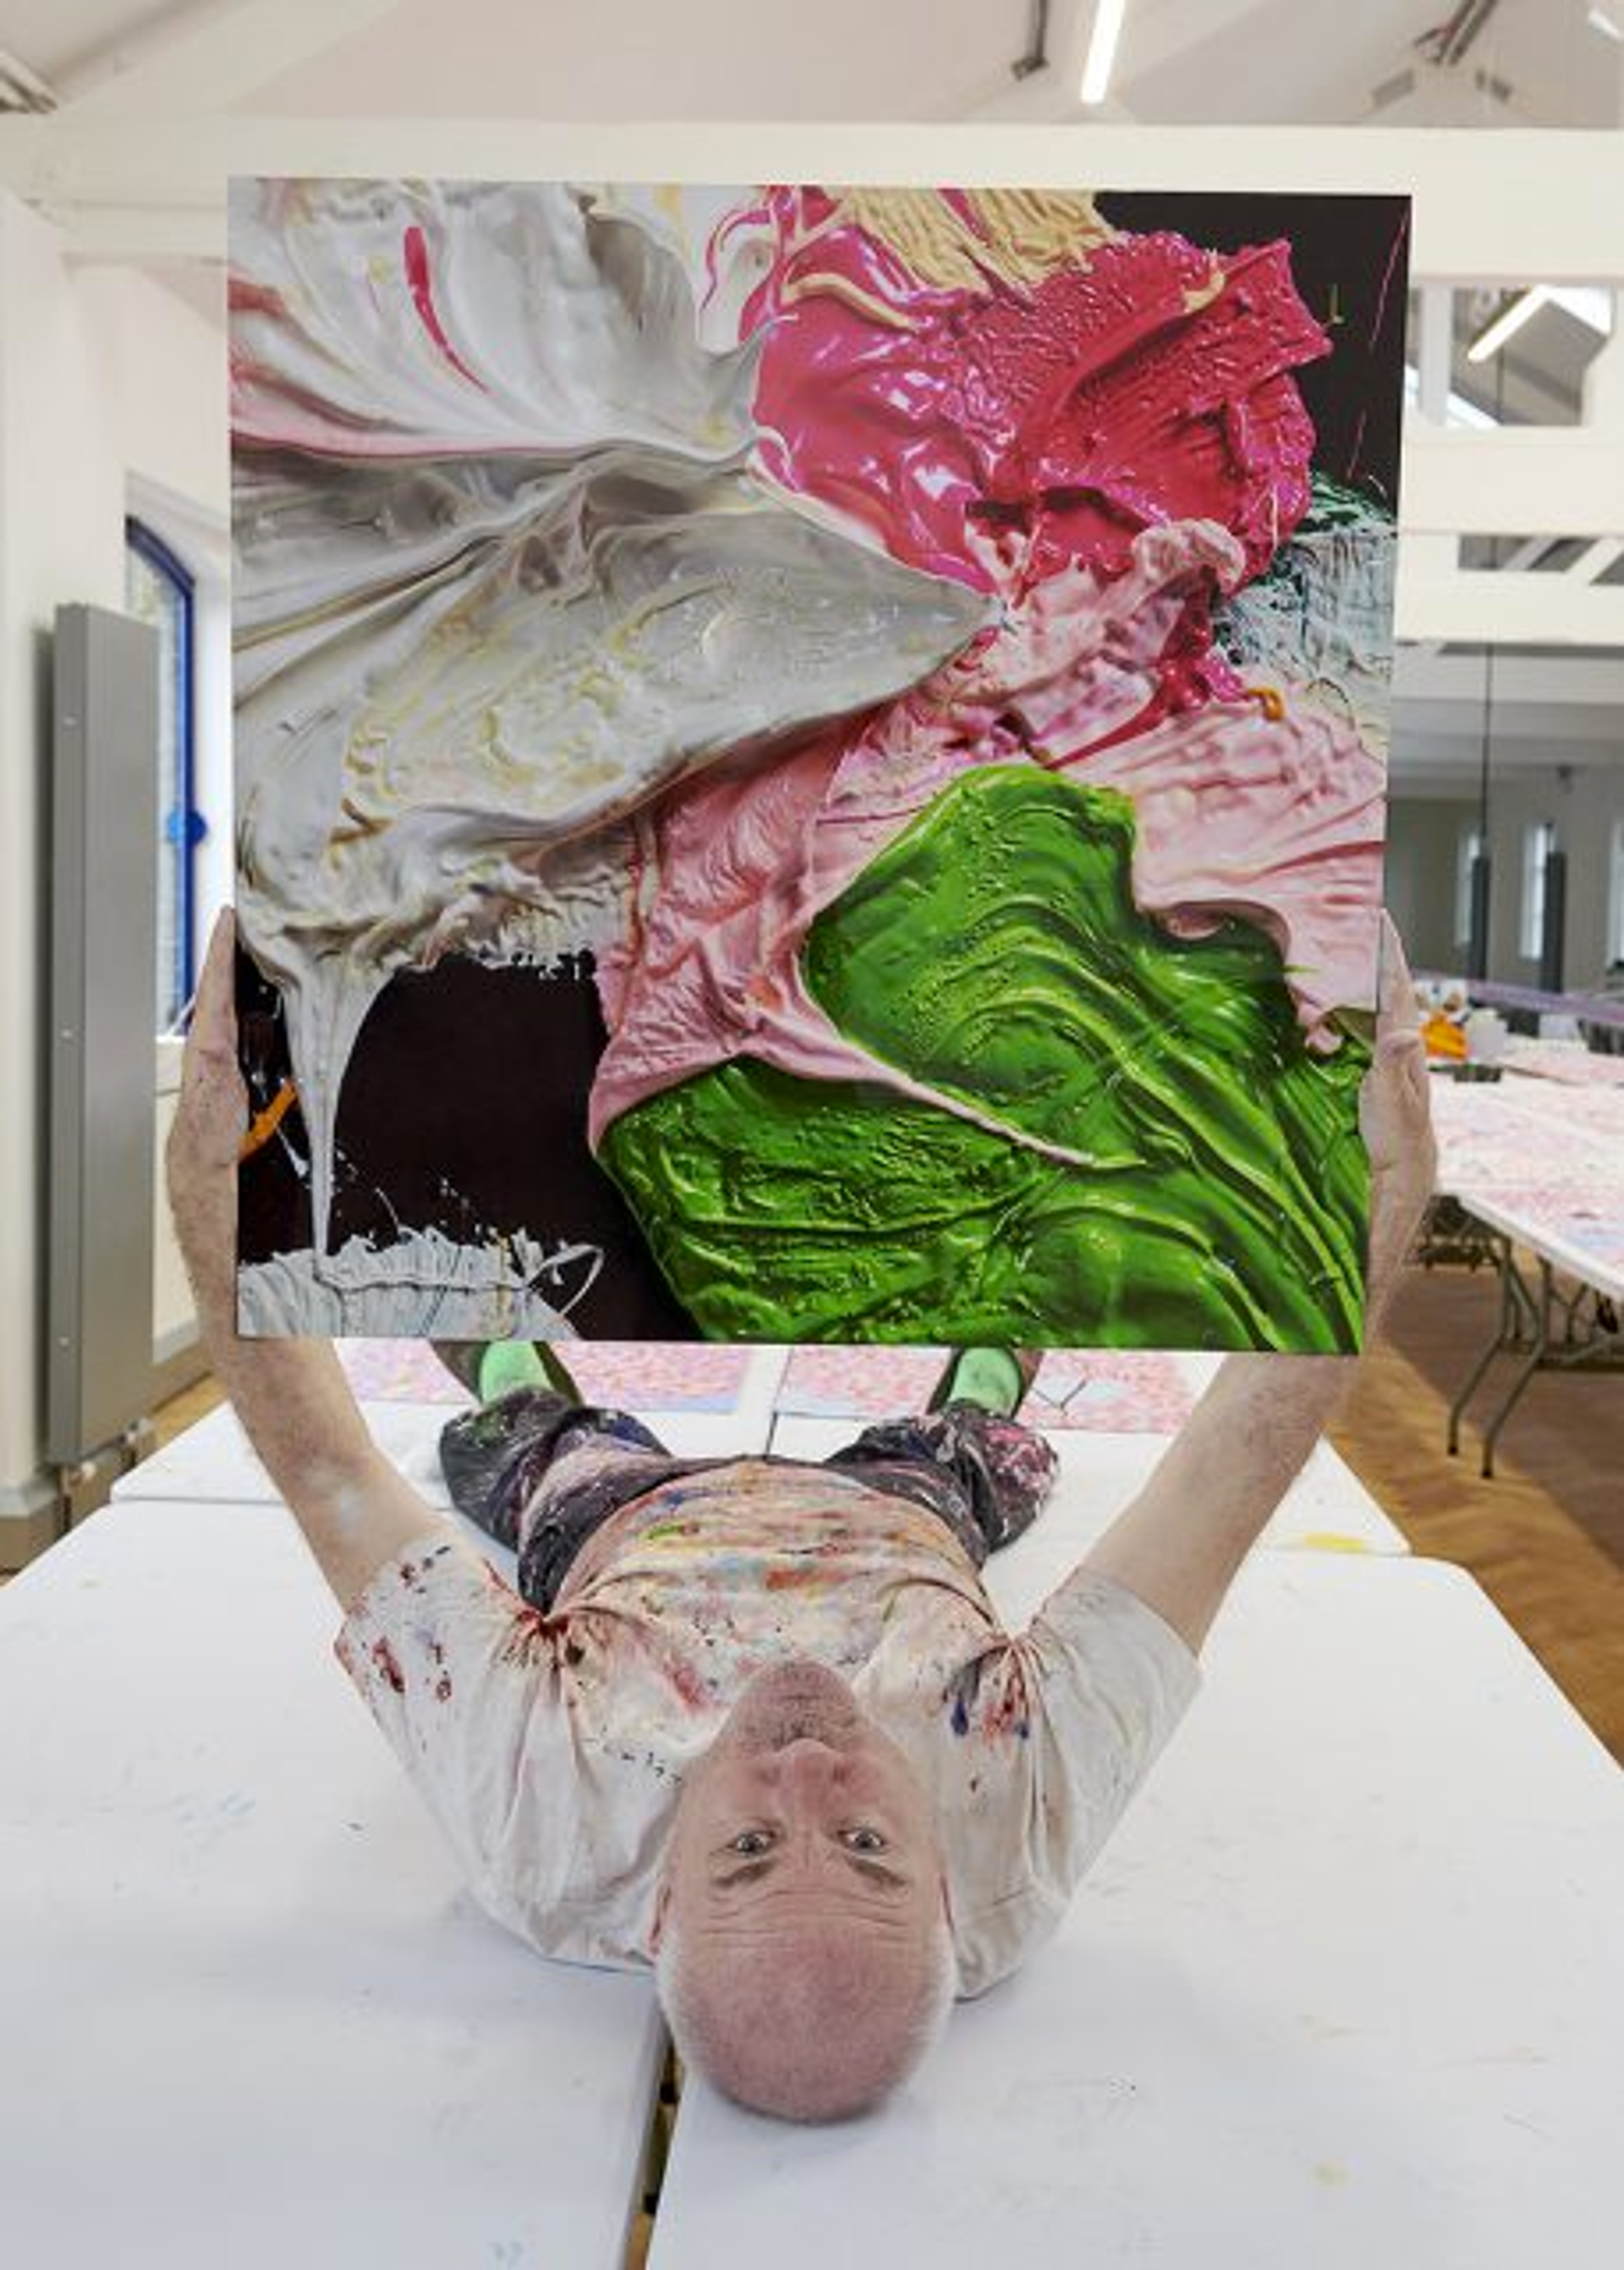 An image of the artist Damien Hirst, lying down and looking up at the viewer, holding one of his prints from the Fruitful And Forever series.